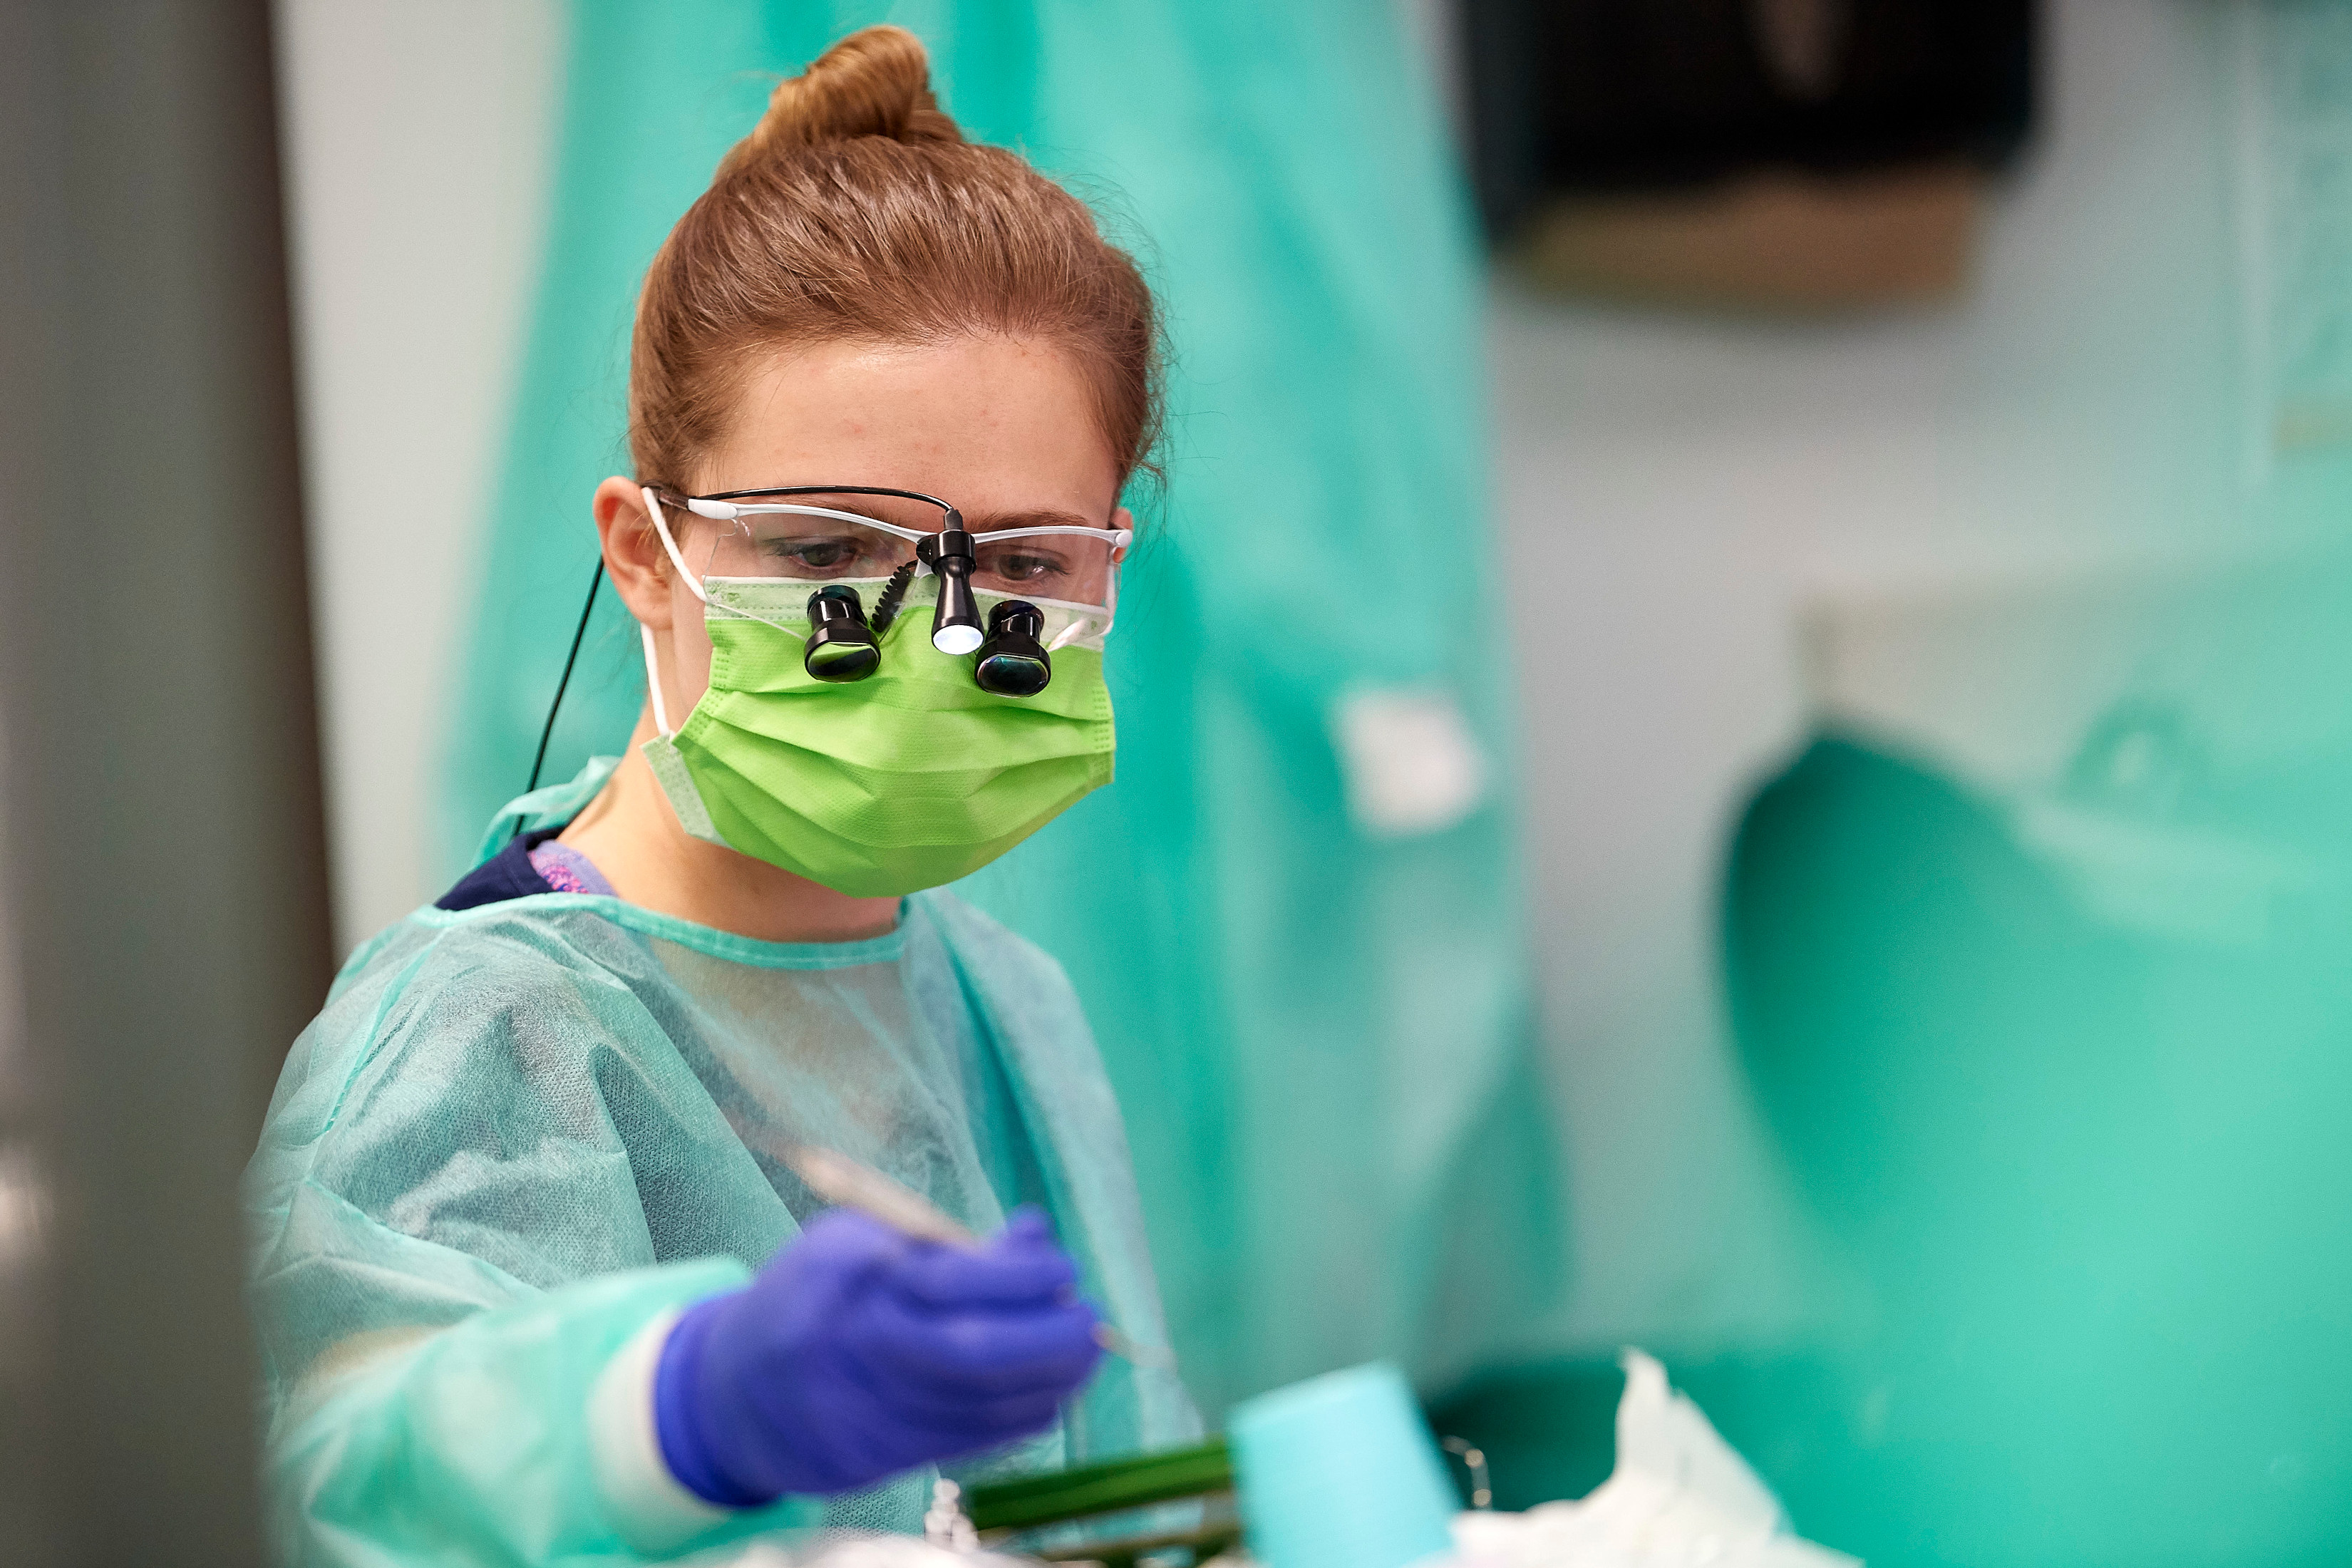 Student dental hygienist wearing eyeglasses, mask, and surgical gown.